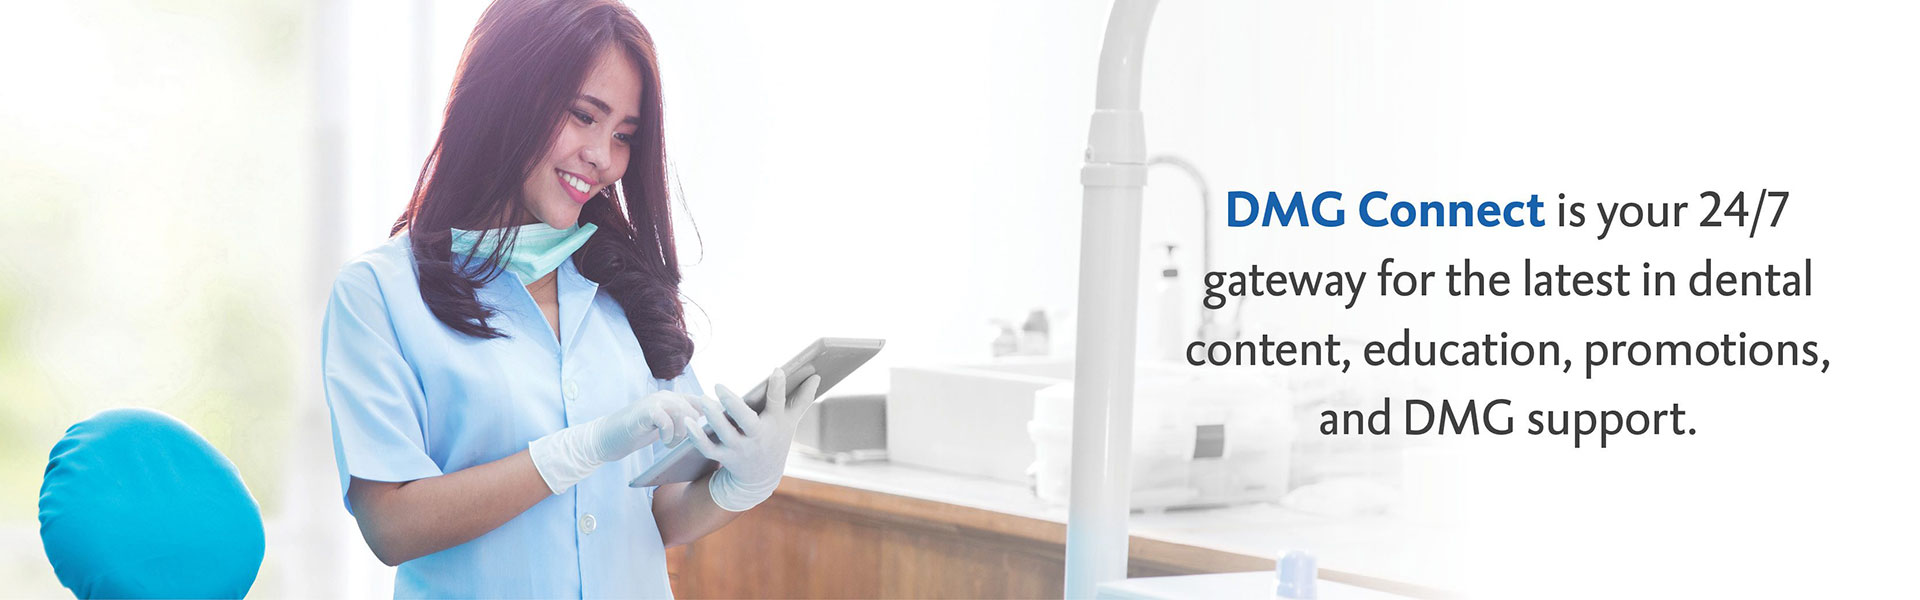 DMG Connect - 24/7 gateway for dental content & support